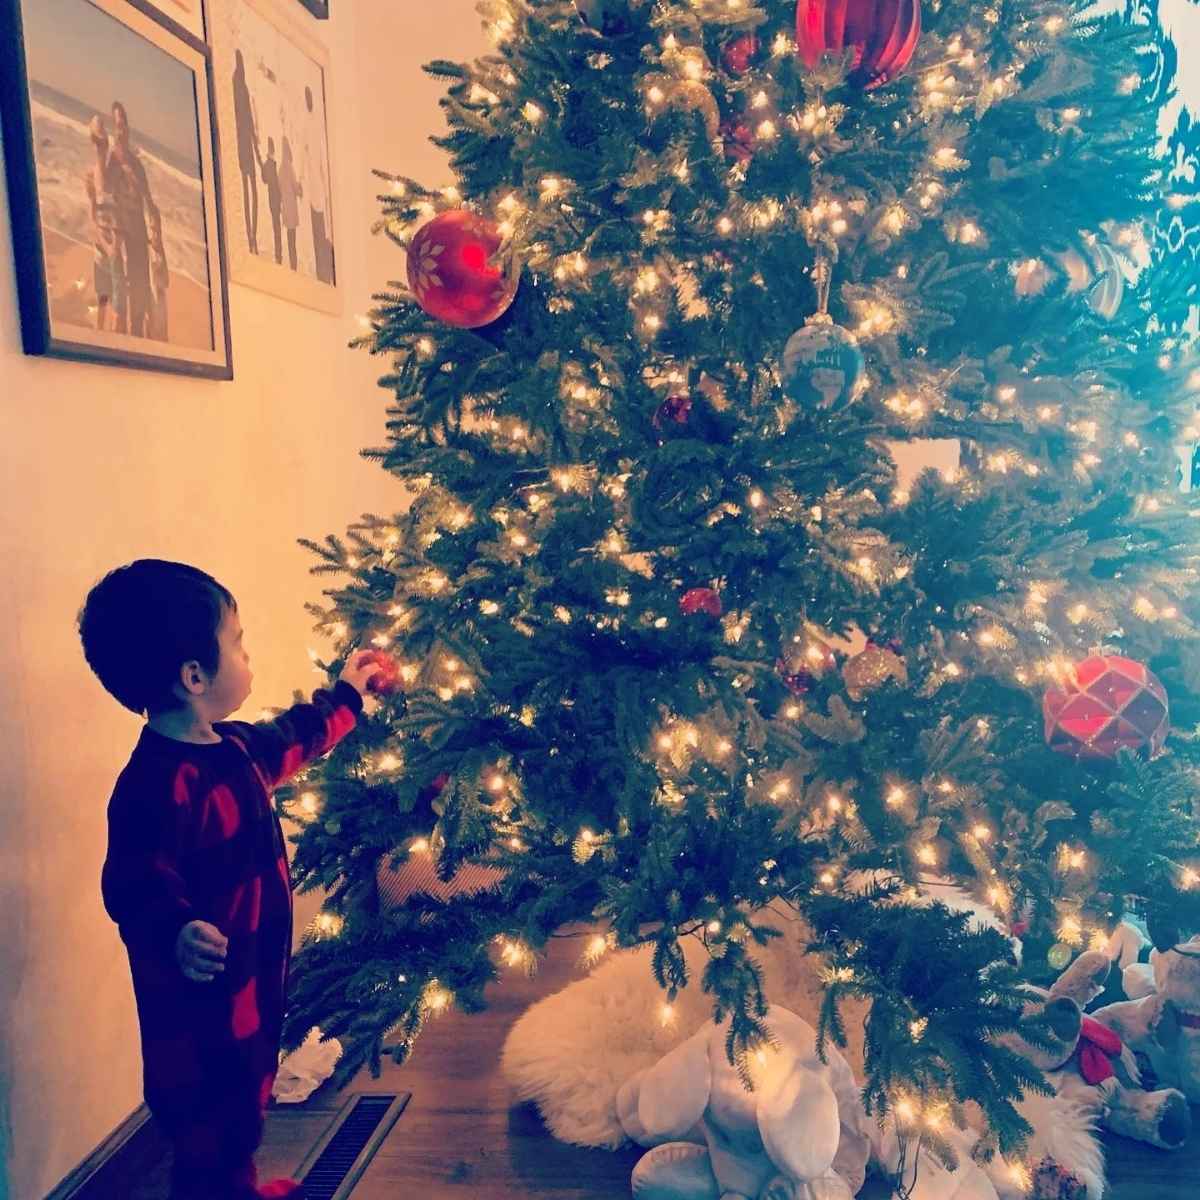 Little boy standing by a Christmas tree